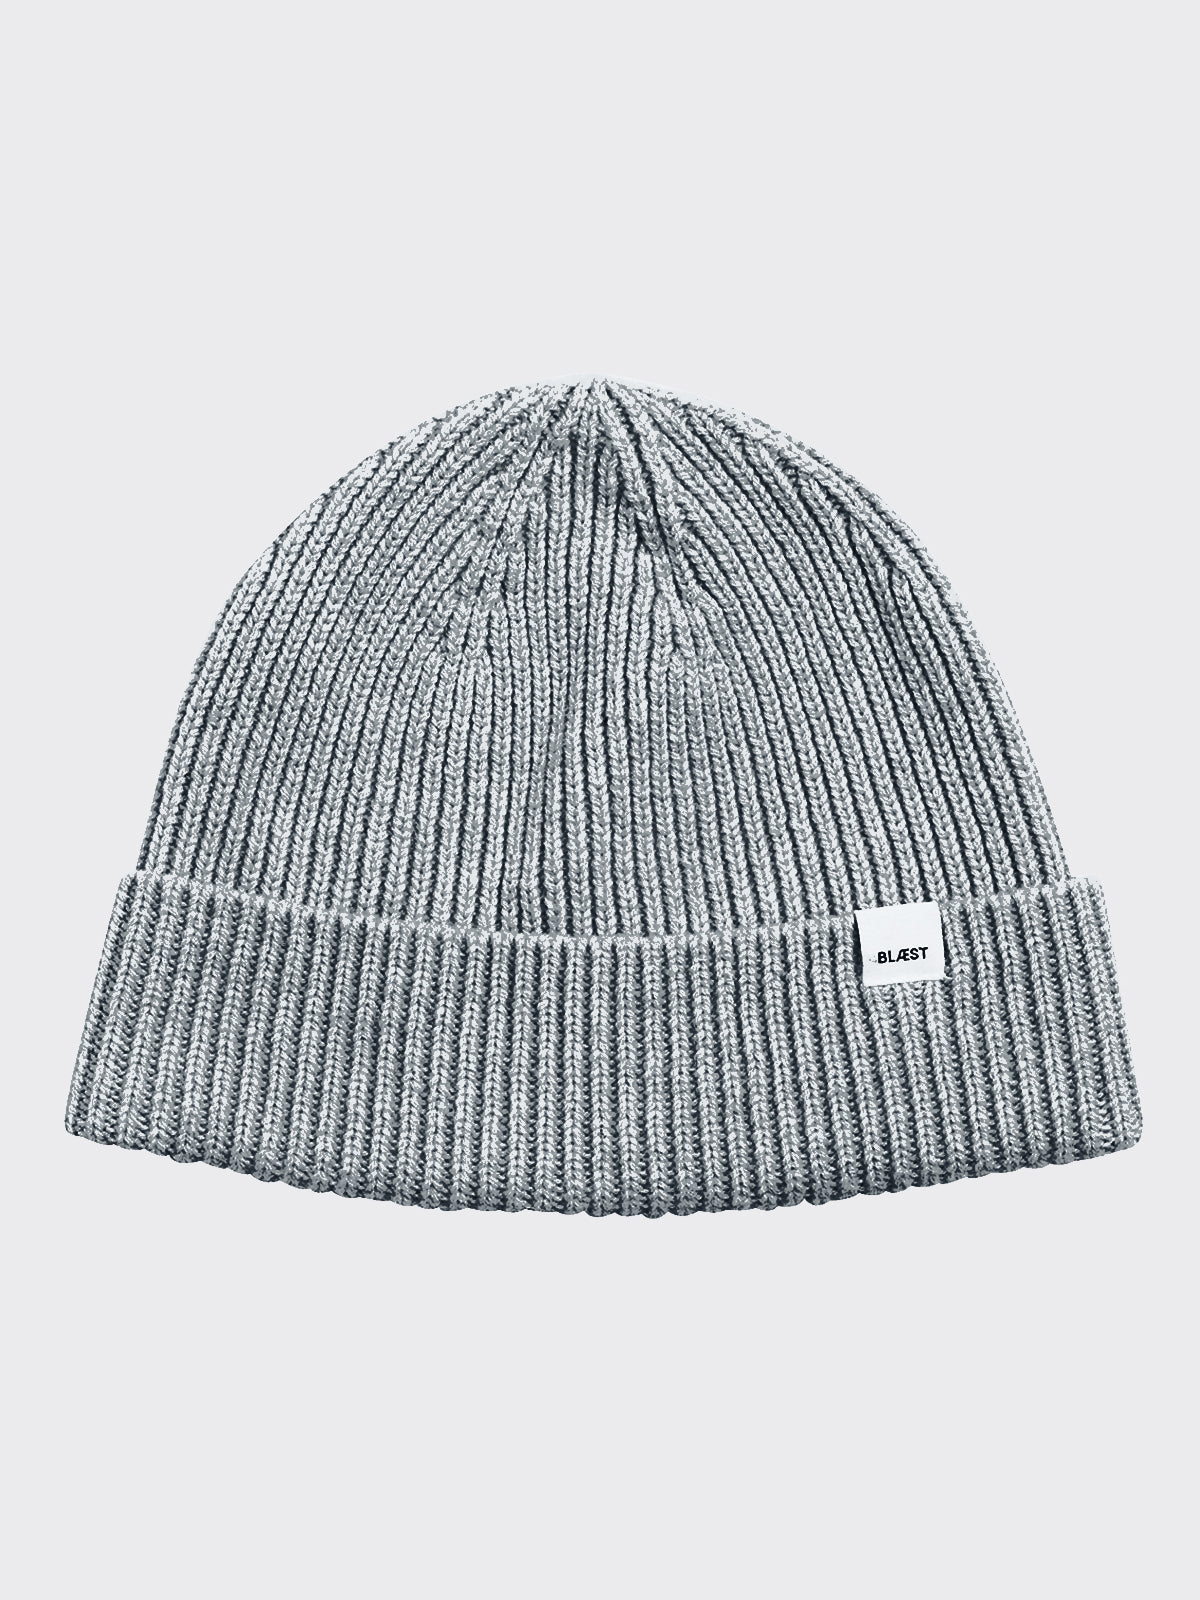 Beanie from Blæst in Grey